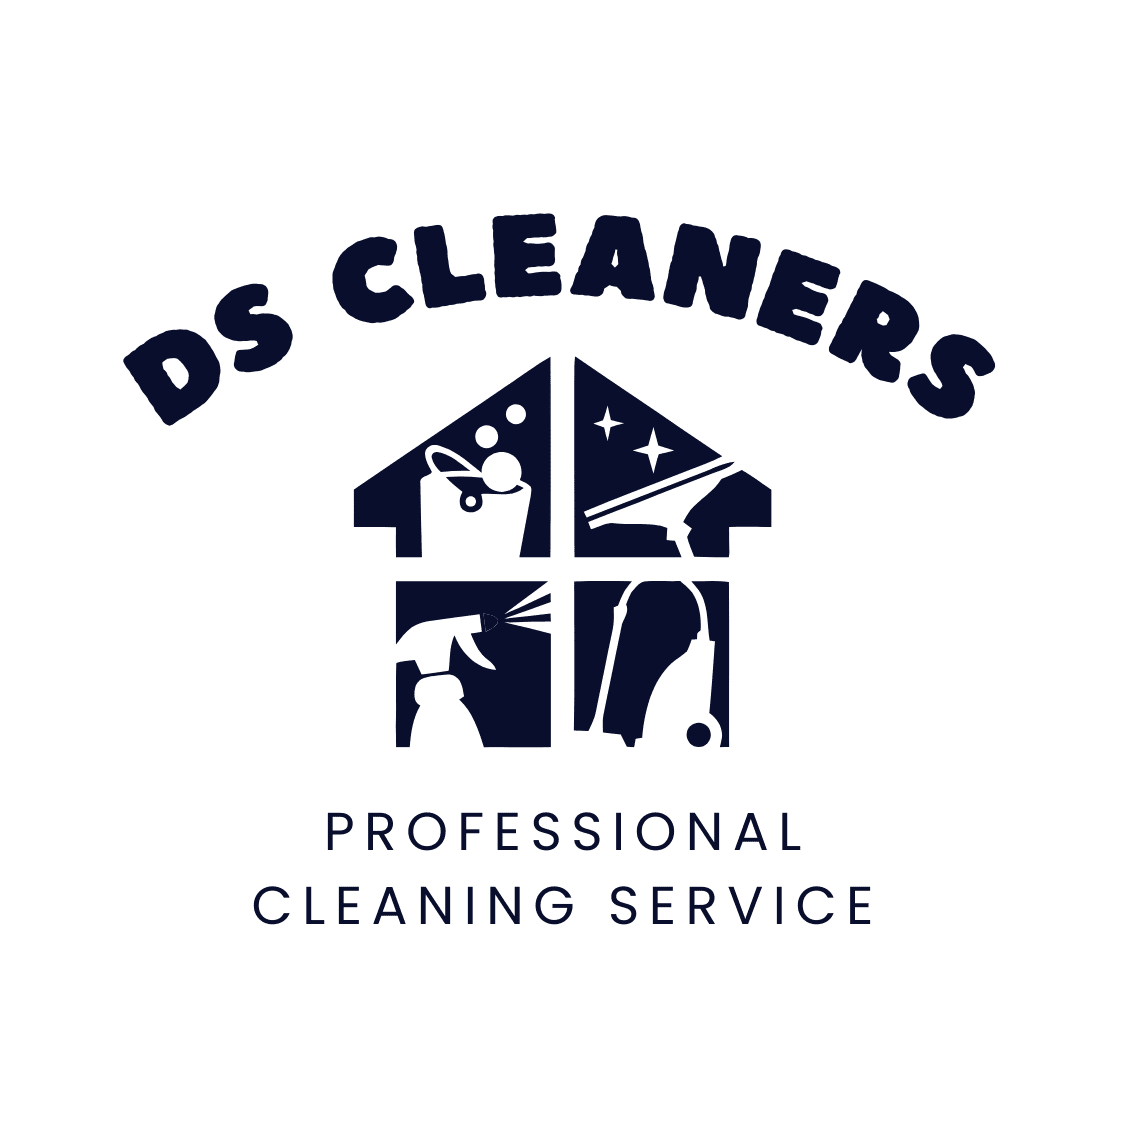 Images DS Cleaners Ltd